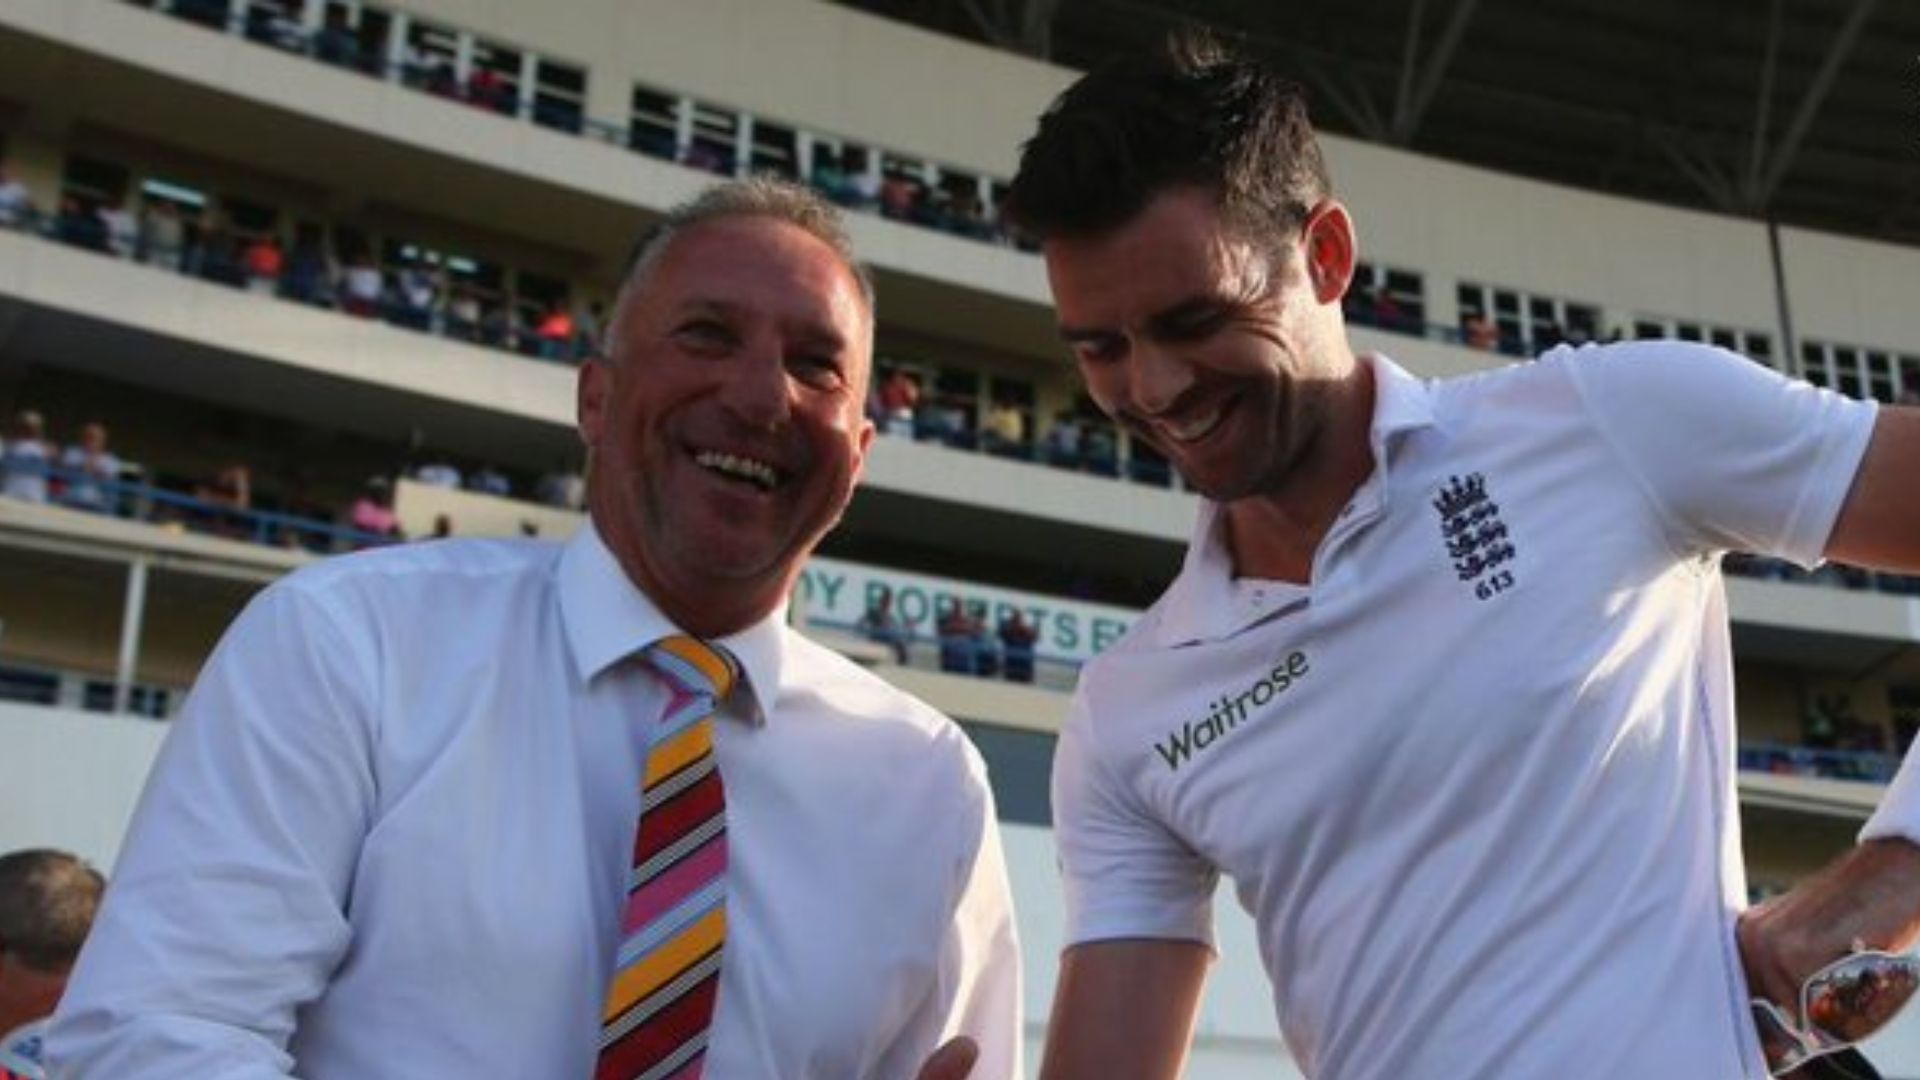 James Anderson has broken new ground by becoming the first pacer to reach 600 wickets.